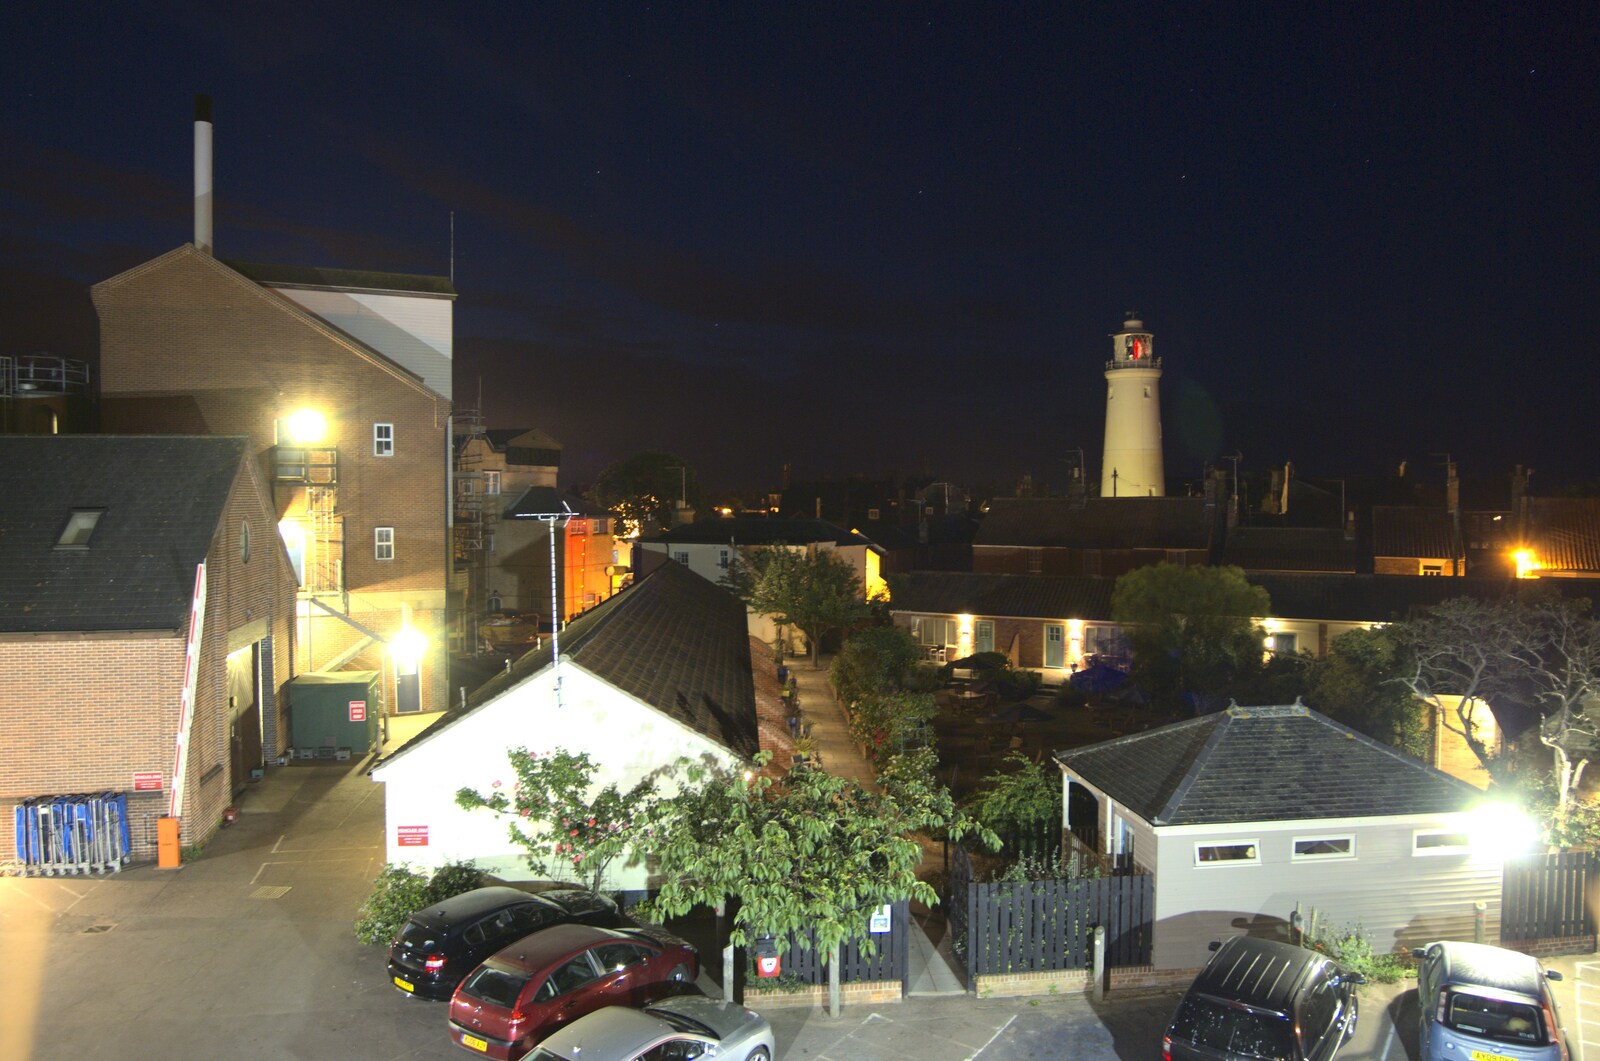 The view from the hotel window at night from A "Minimoon" and an Adnams Brewery Trip, Southwold, Suffolk - 7th July 2010